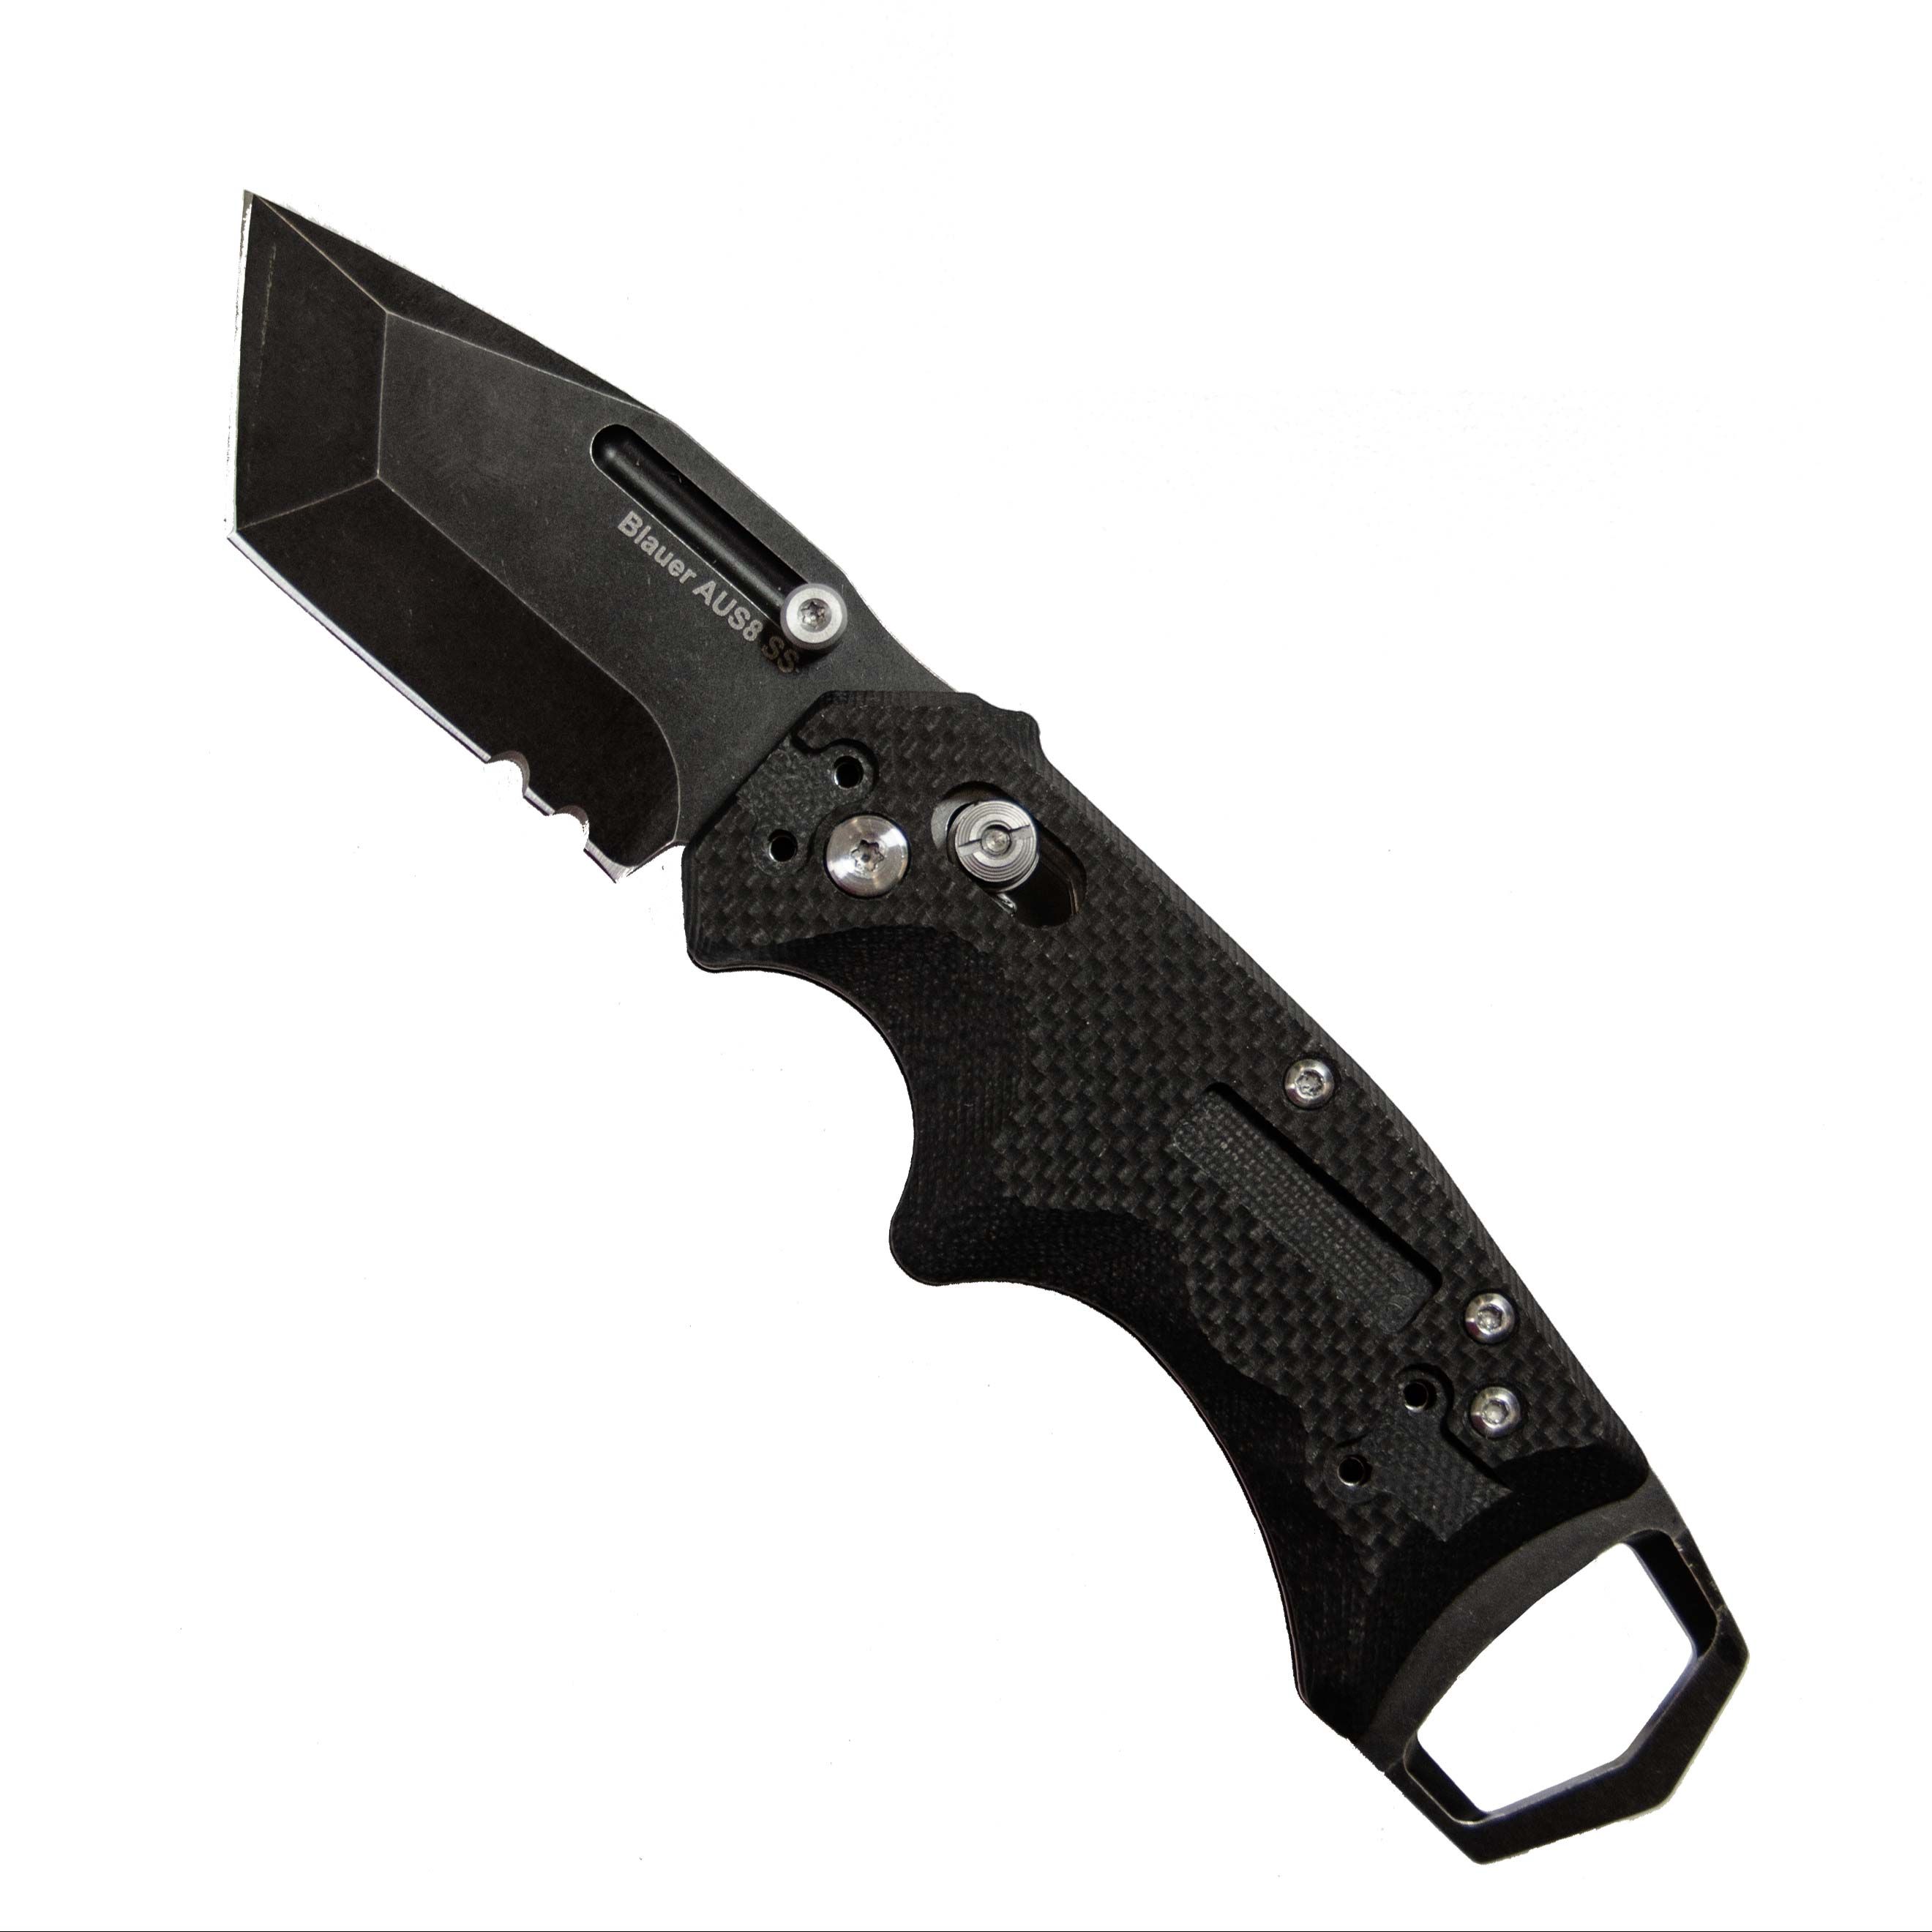 Rough Rider Grey Spring Assisted Tactical Knife ... - Amazon.com